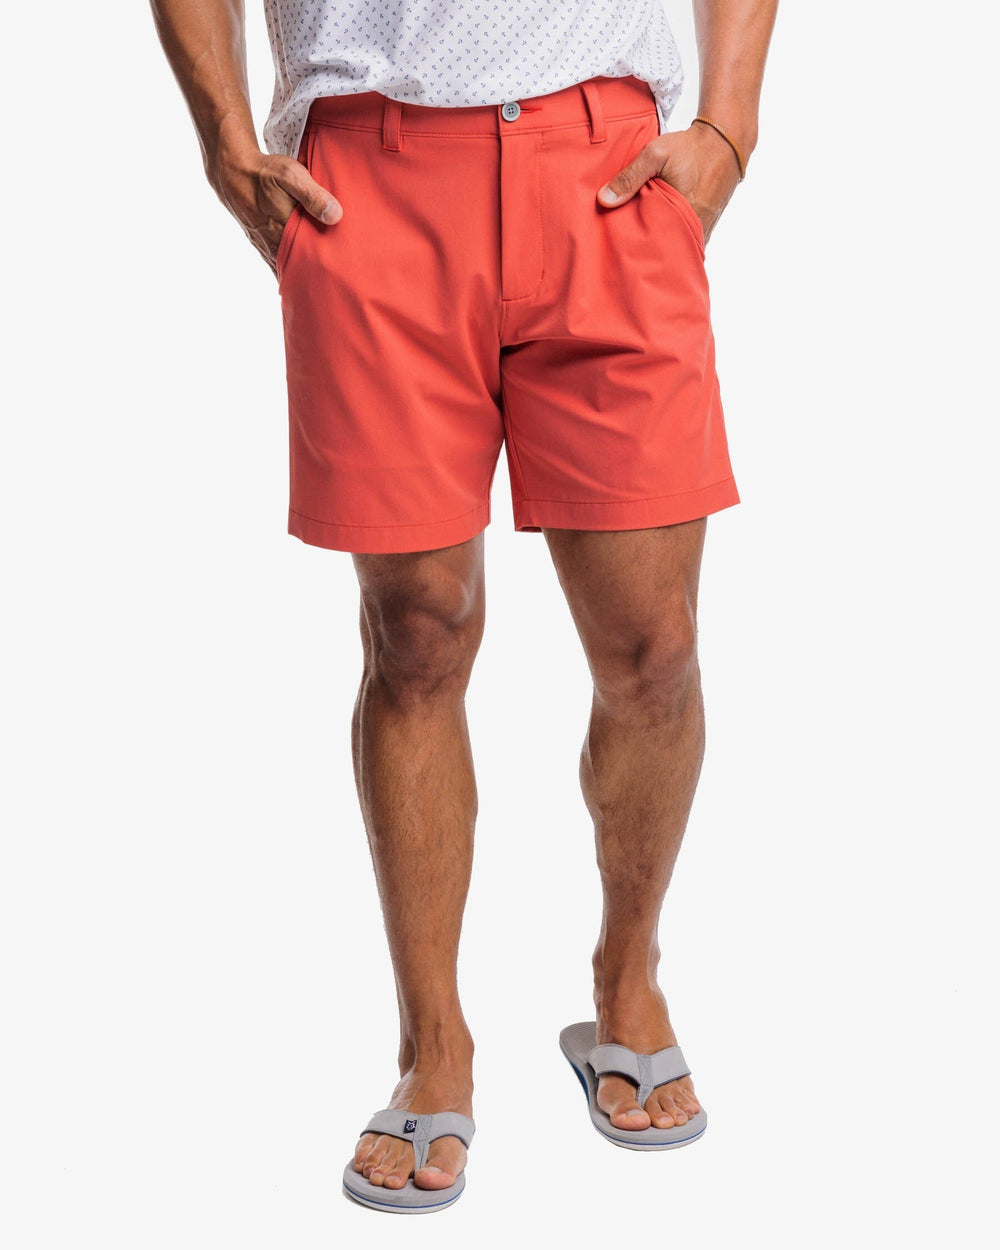 The front view of the Southern Tide brrr°®-die 8 Inch Performance Short by Southern Tide - Mineral Red